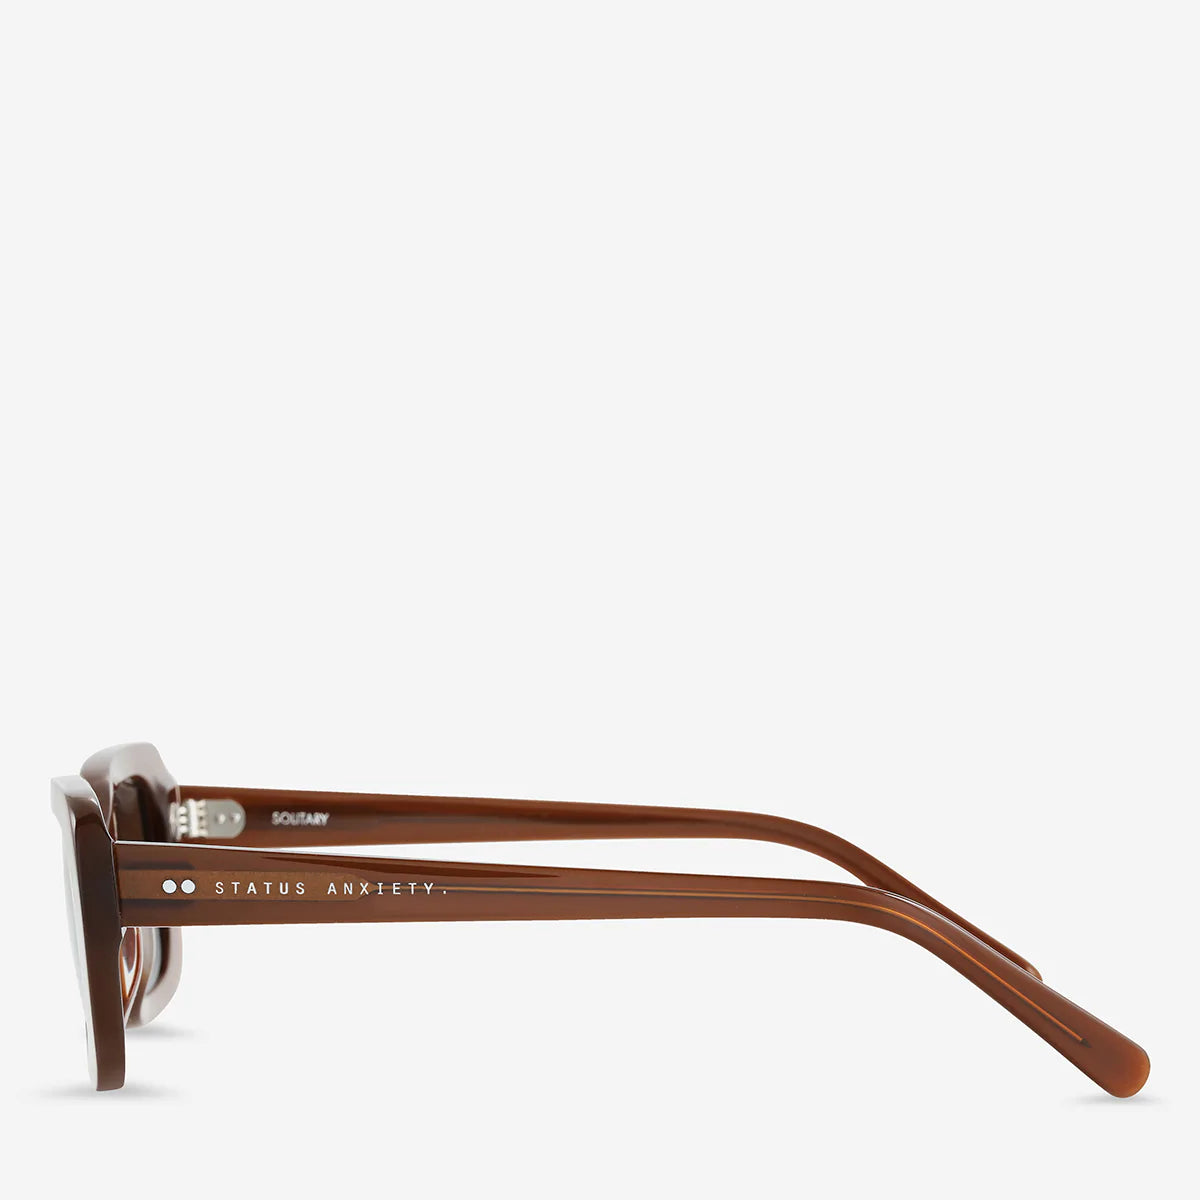 Solitary Sunglasses in Brown